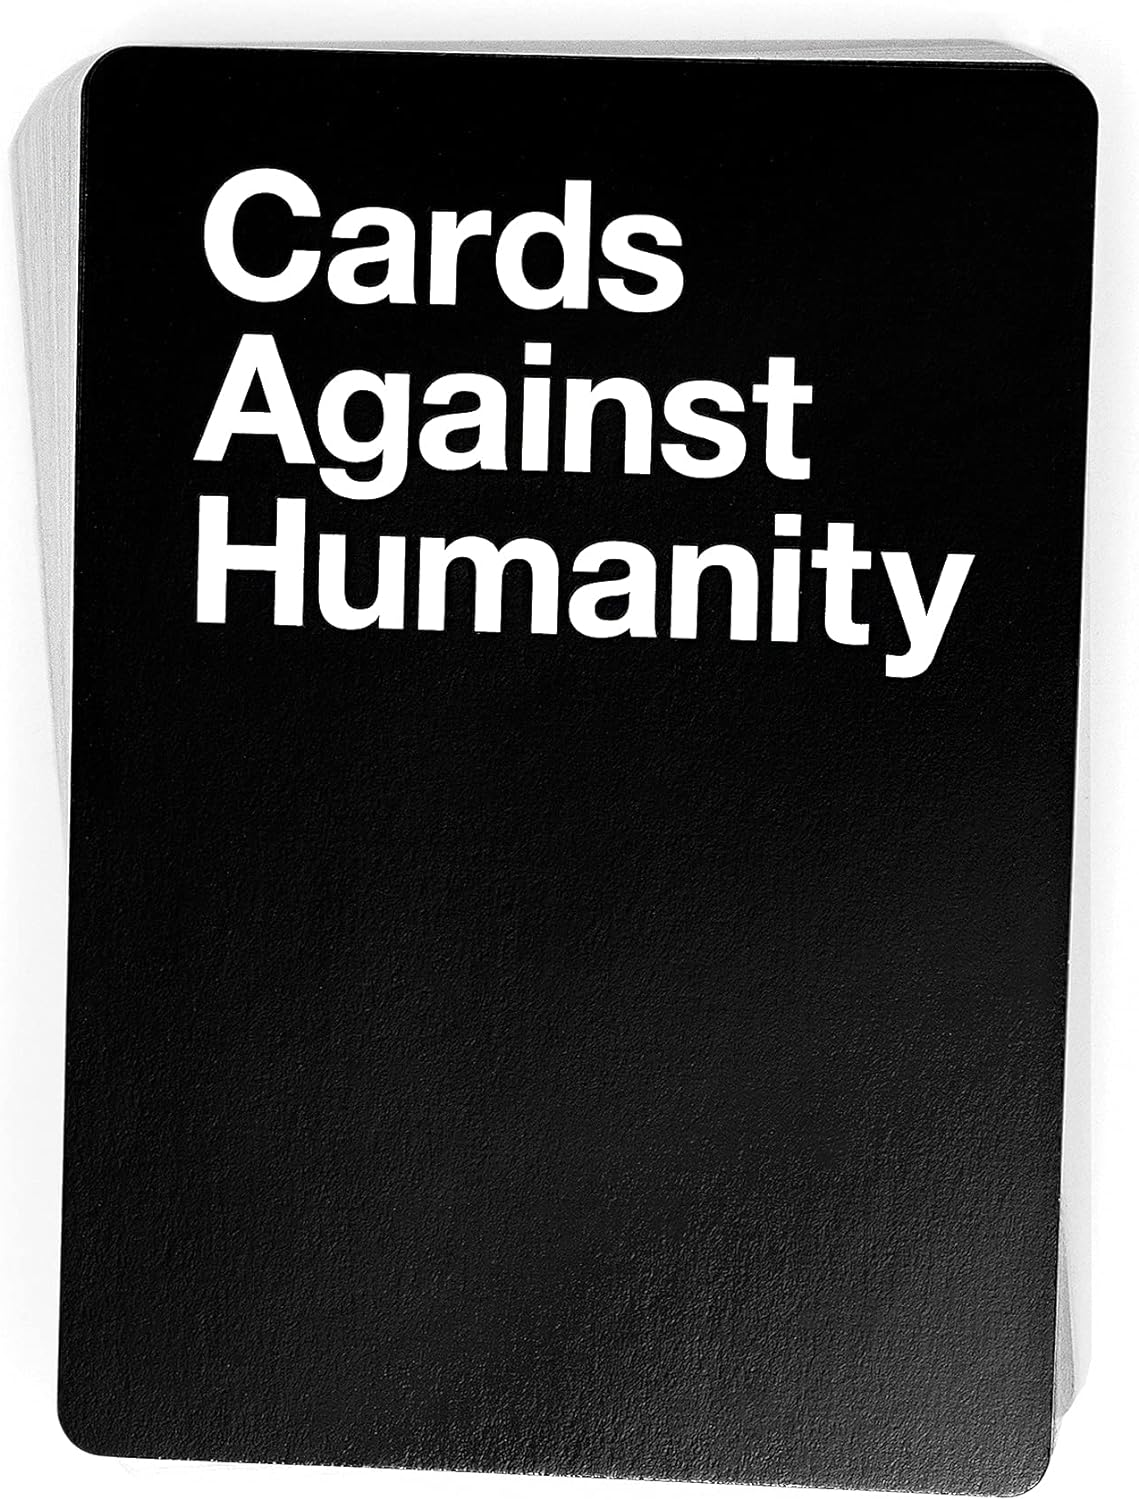 Cards Against Humanity: Absurd Box,Black